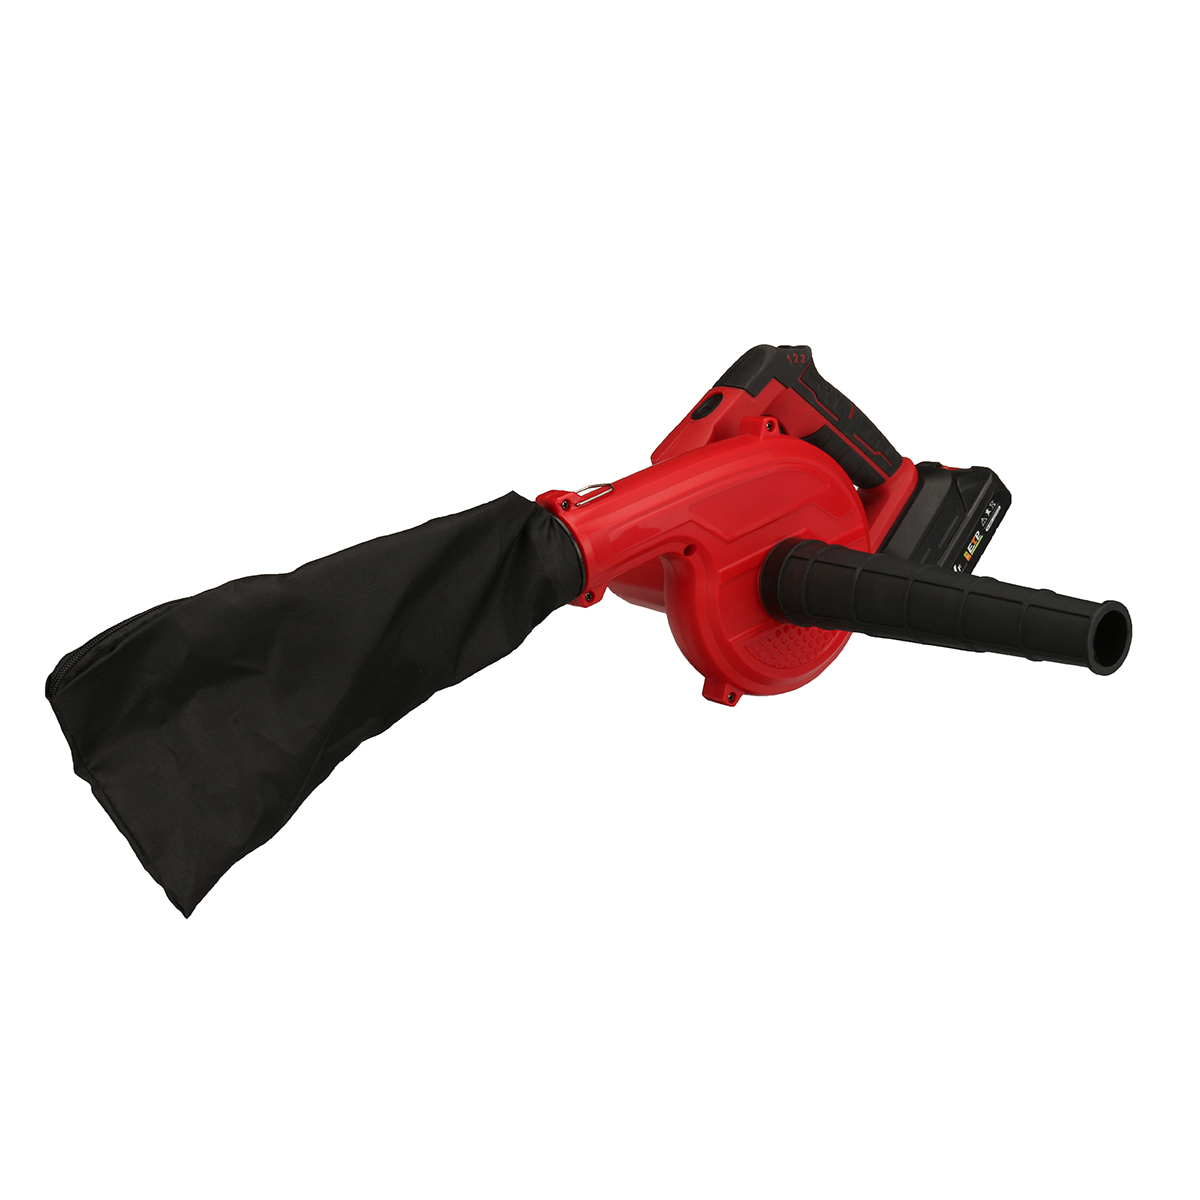 VIOLEWORKS-98VF-2-IN-1-Cordless-180deg-Rotation-Electric-Air-Blower--Suction-Handheld-Leaf-Computer--1920391-9